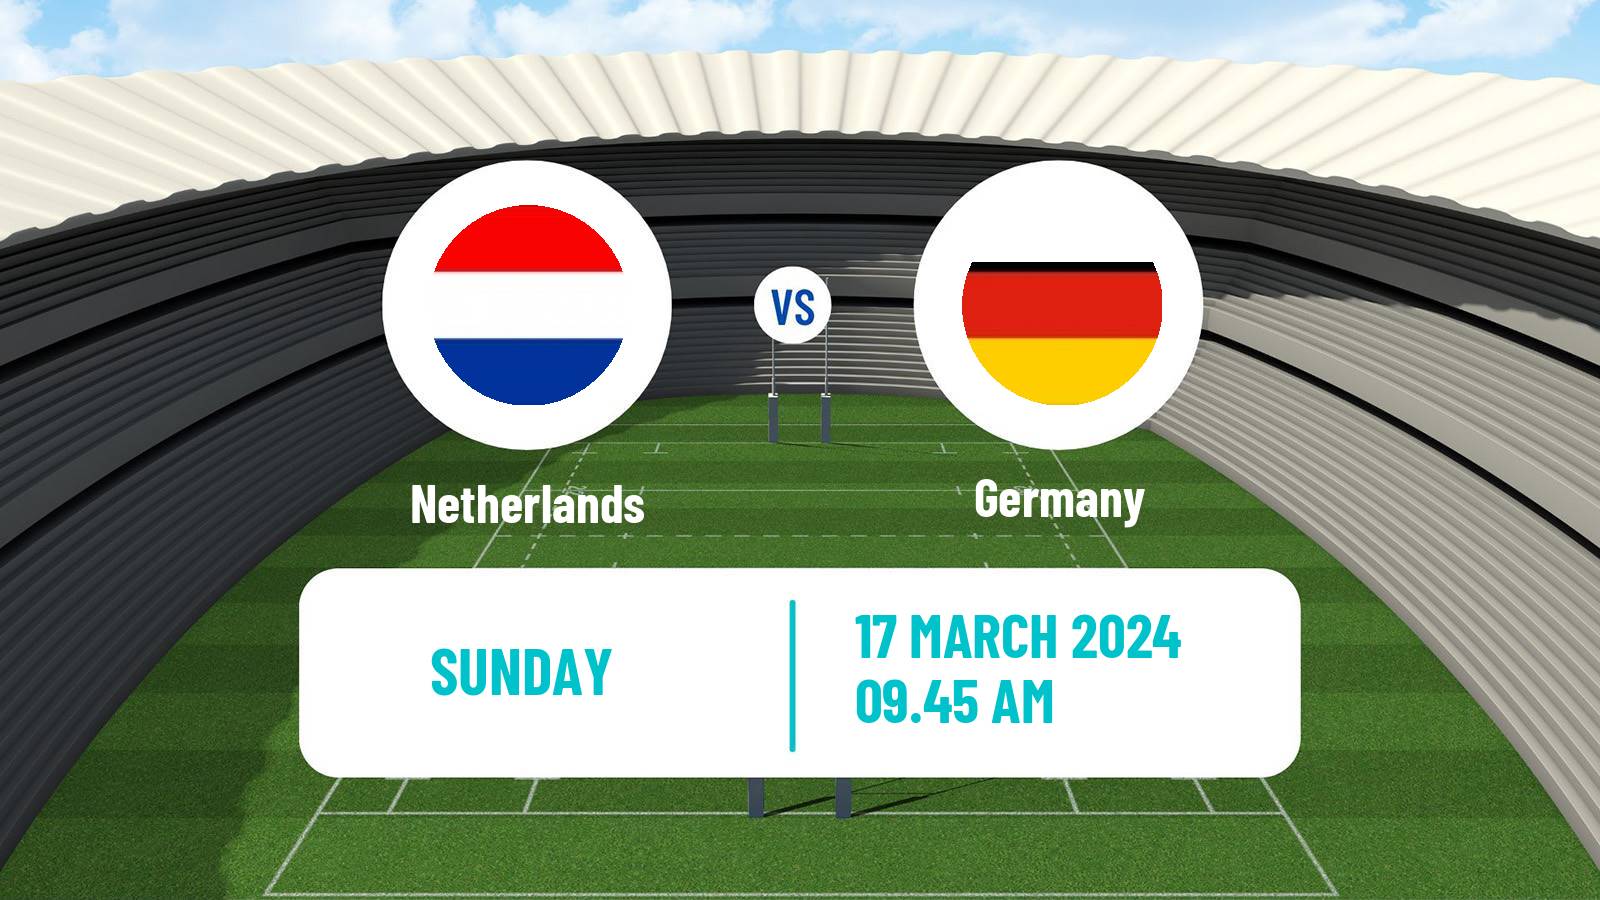 Rugby union Rugby Europe Championship Netherlands - Germany